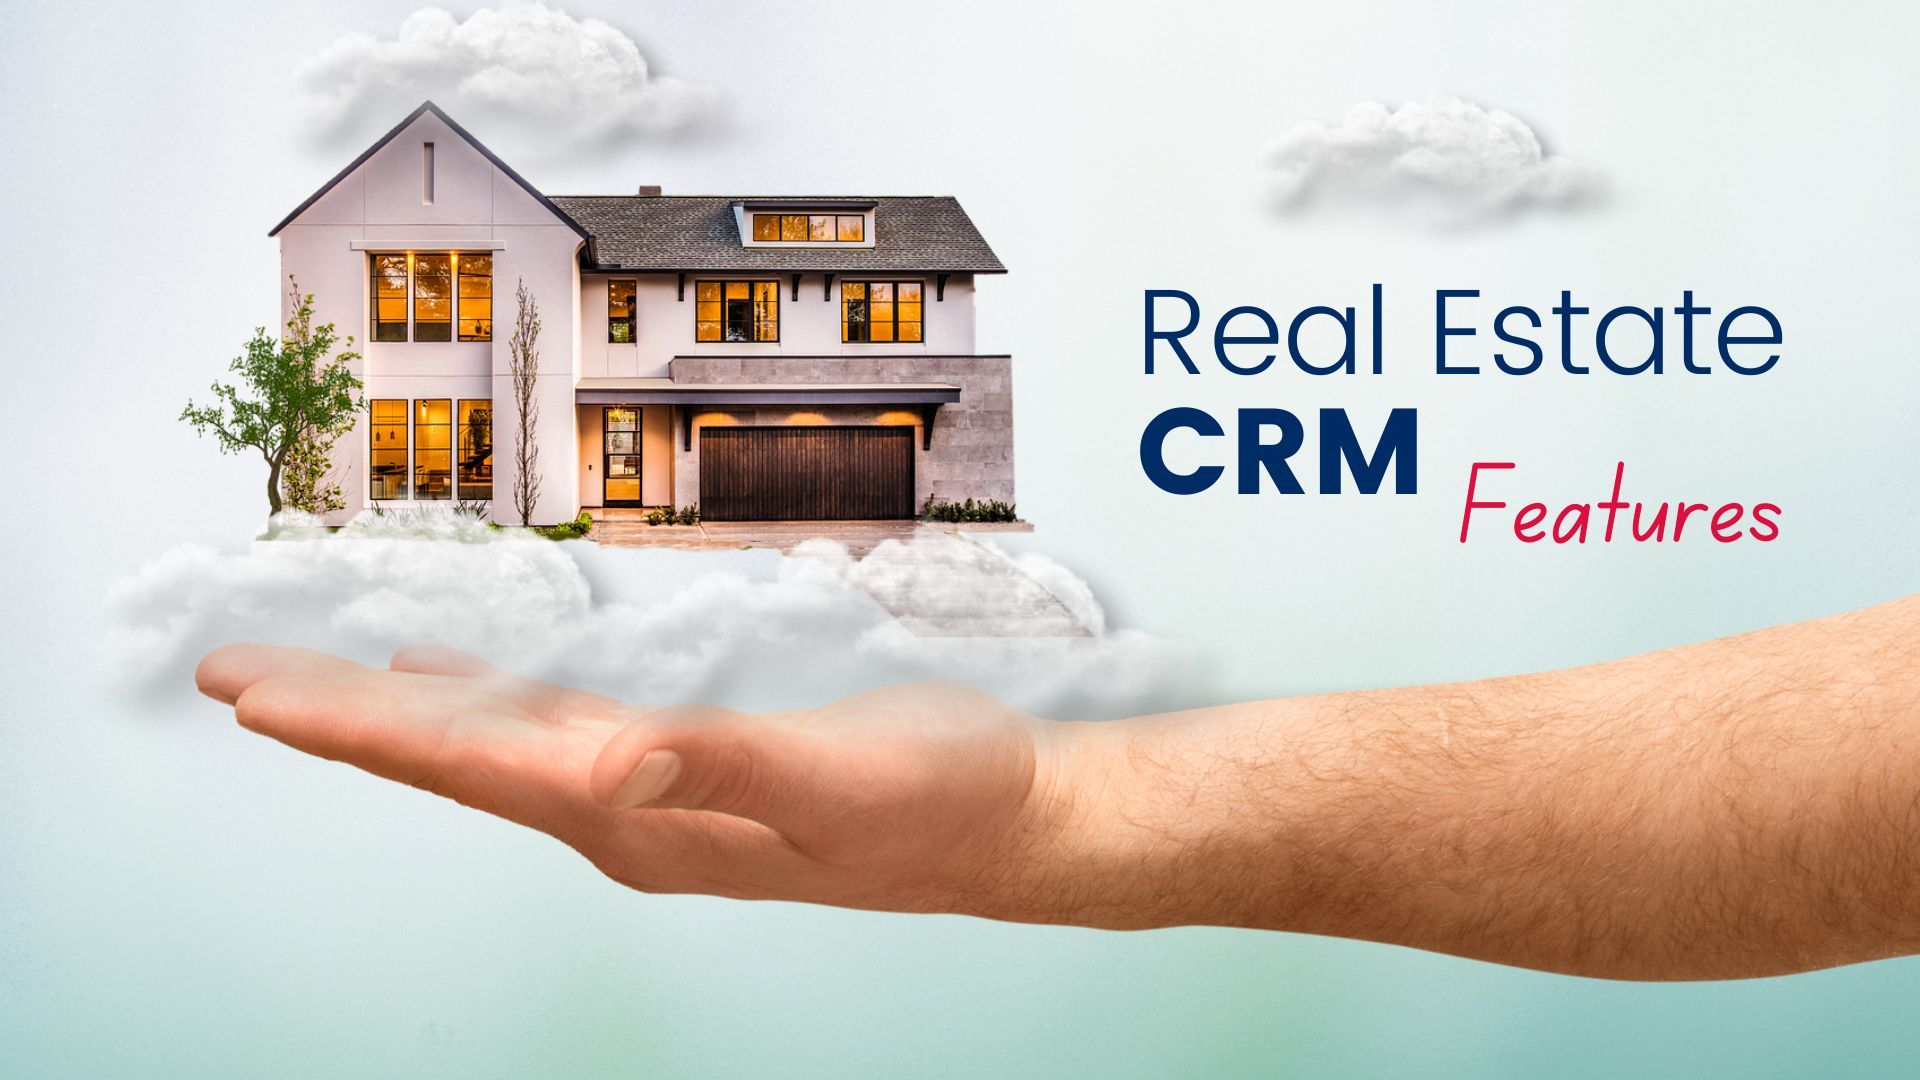 Real Estate CRM Features